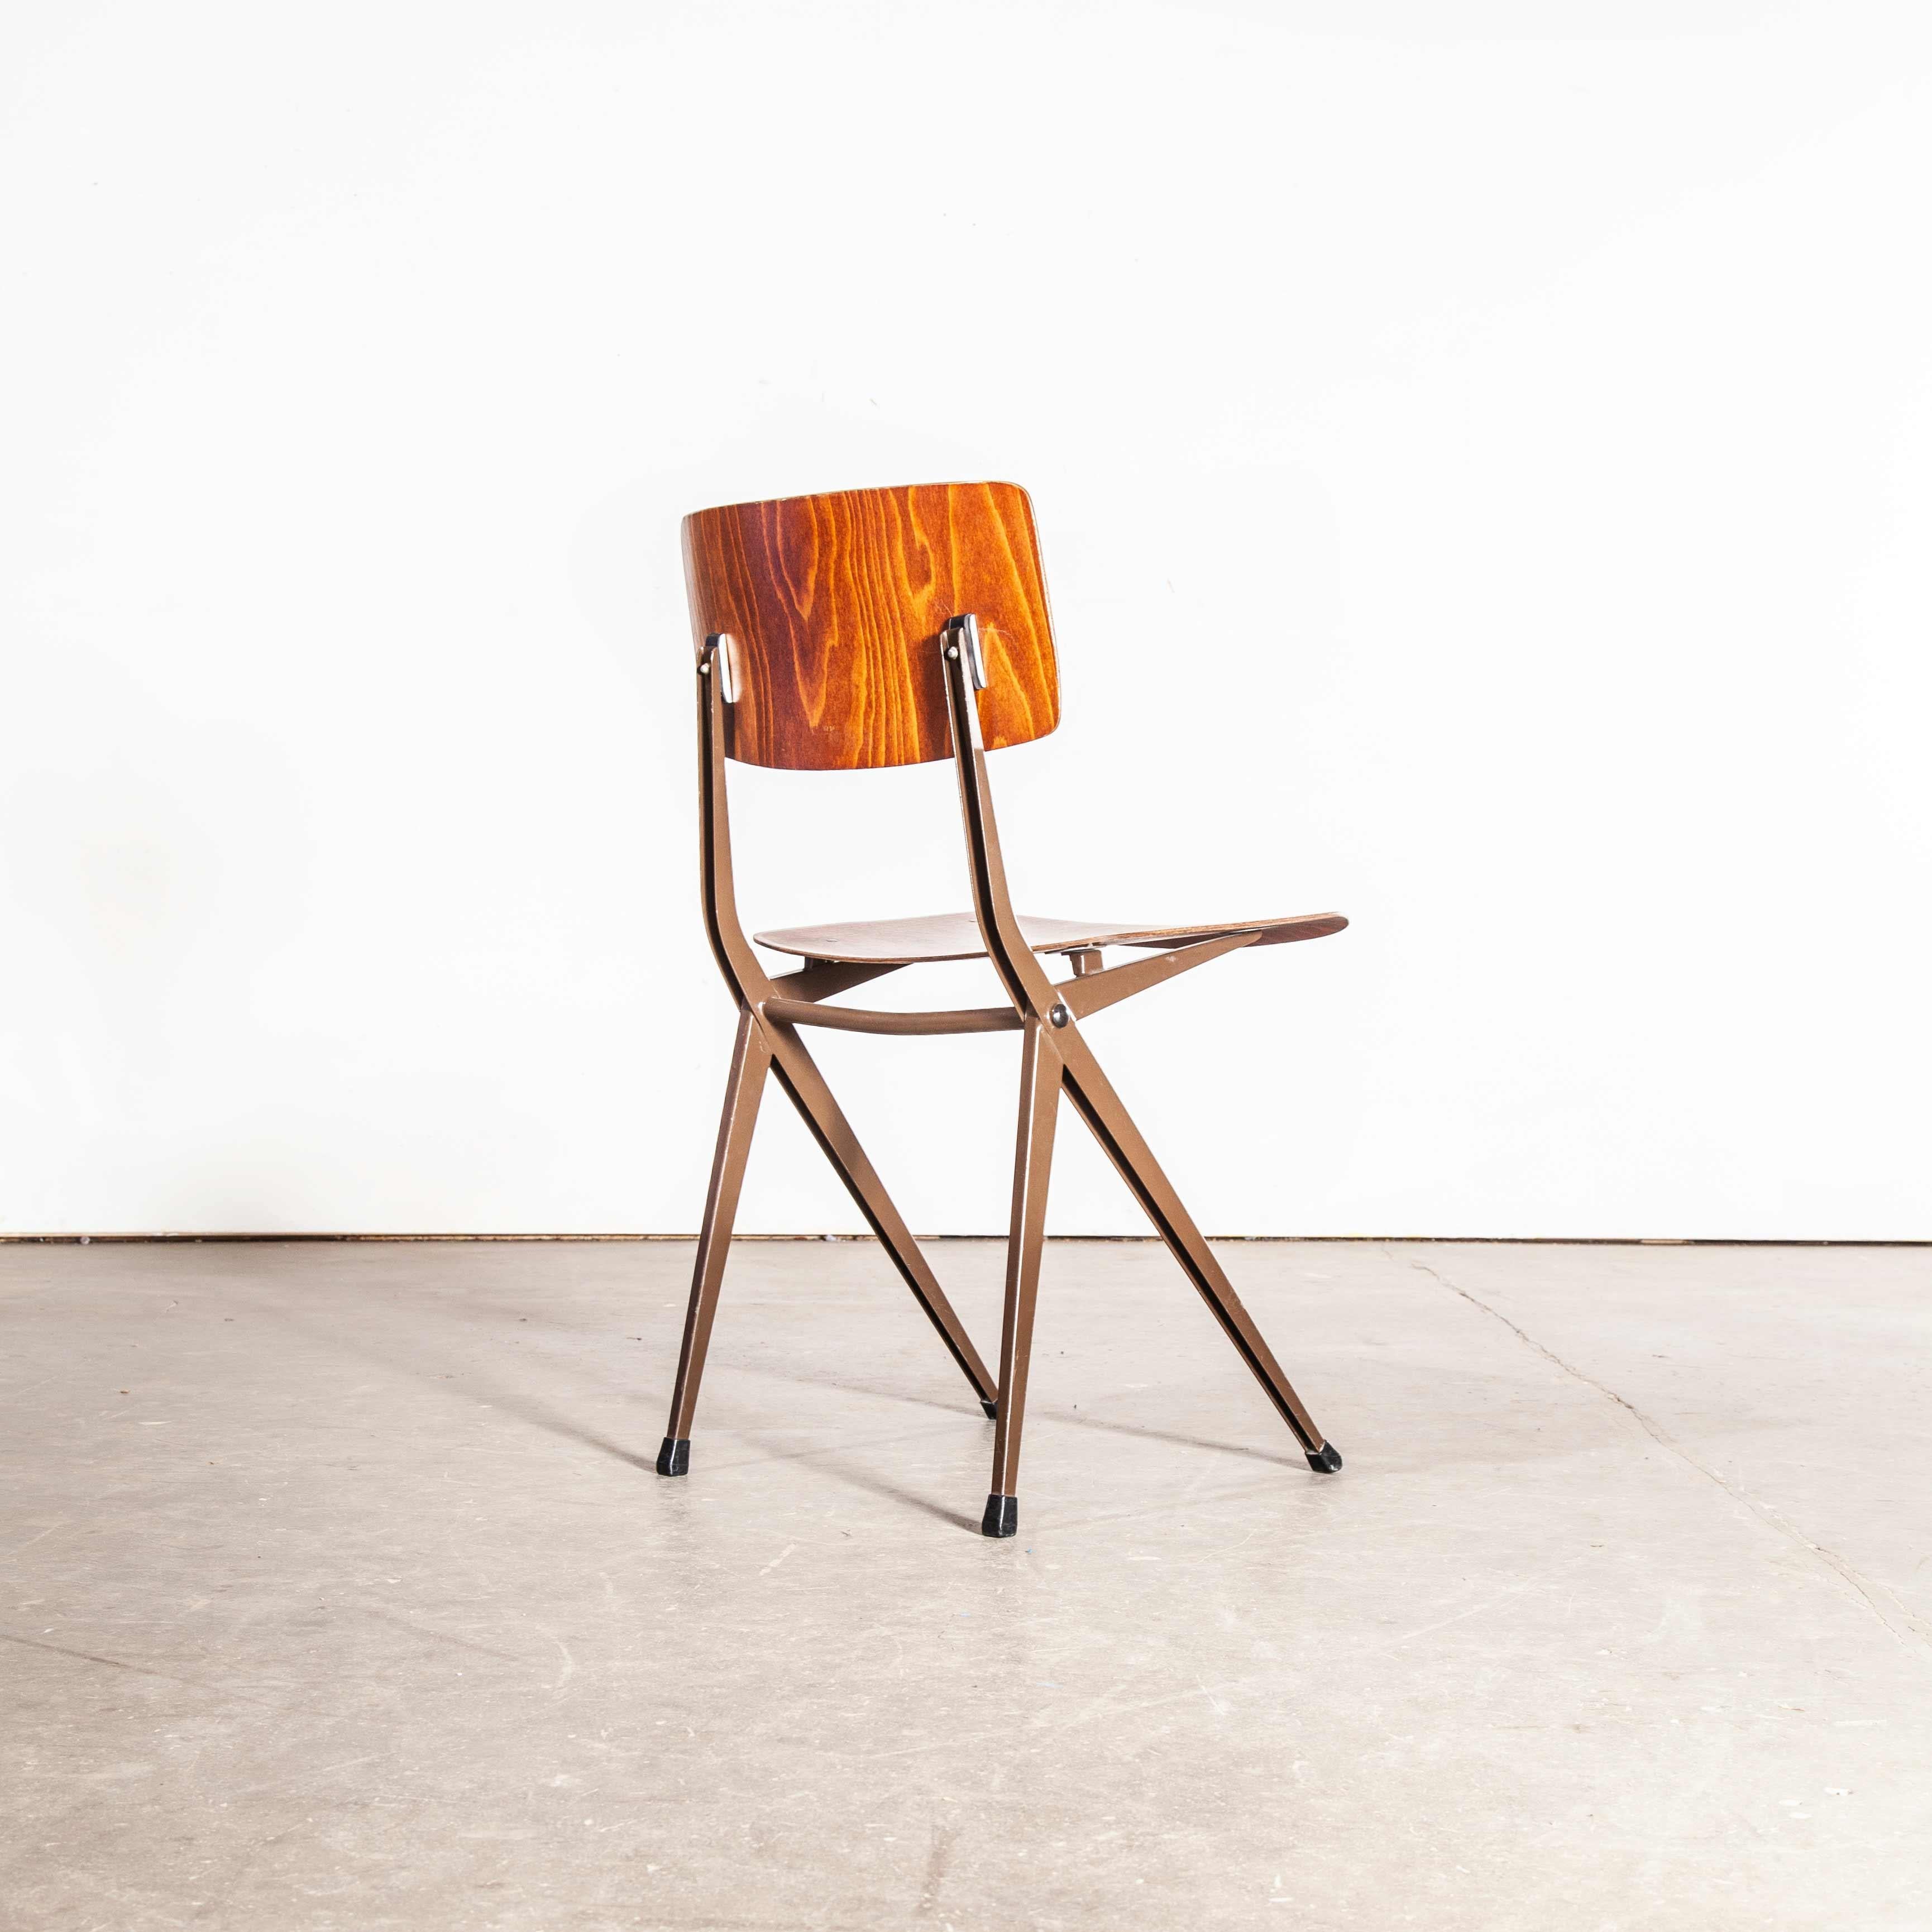 S201 dining chair by Ynske Kooistra for Marko – set of six. The classic Dutch compass leg chair was perhaps originally created by Prouve who then inspired a number of beautiful chair designs in the late 1950s. Friso Kramer and Wim Rietveld designed